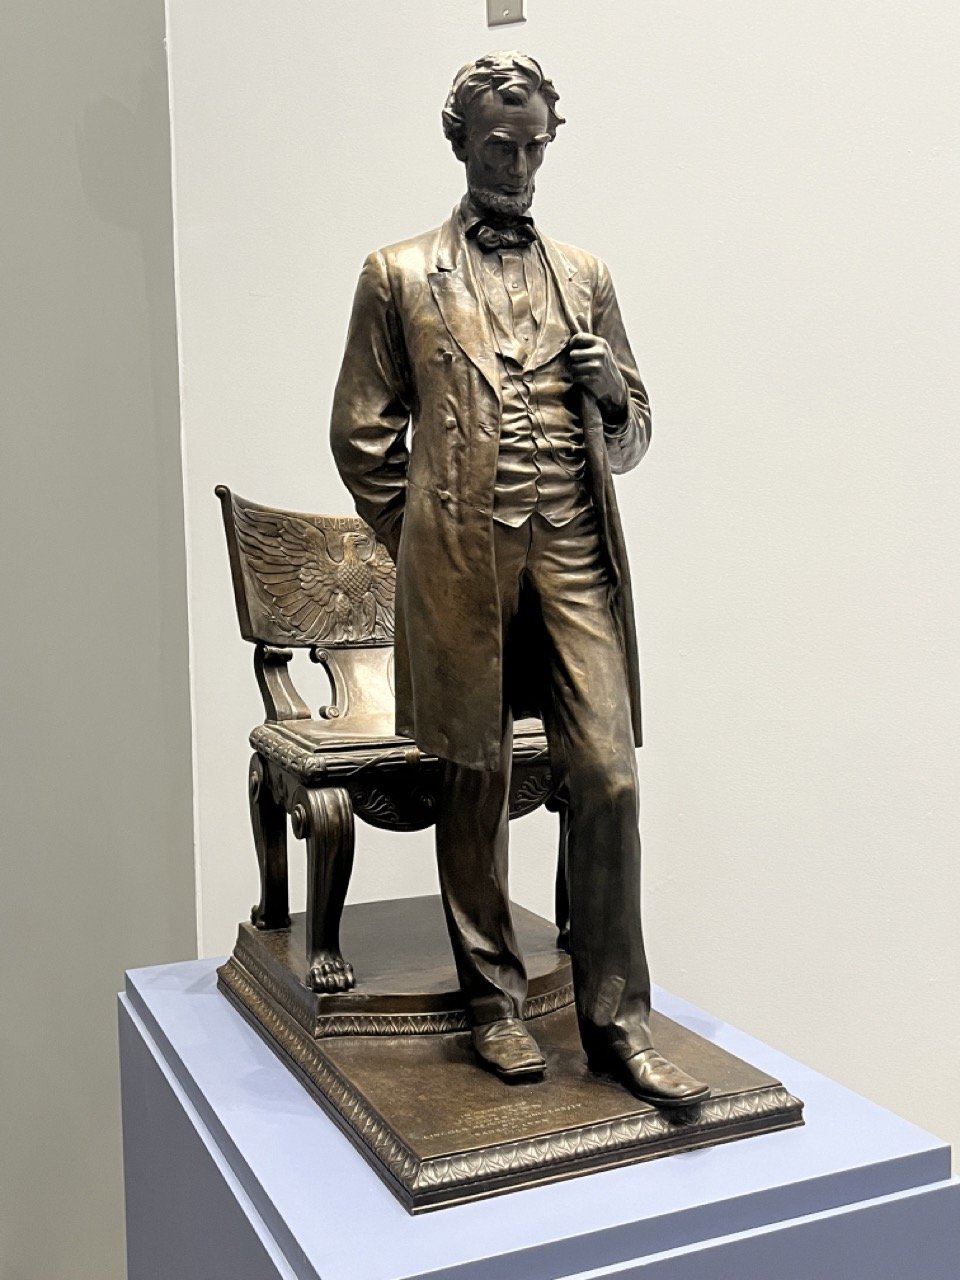 One of several cool statues of Lincoln at the museum.